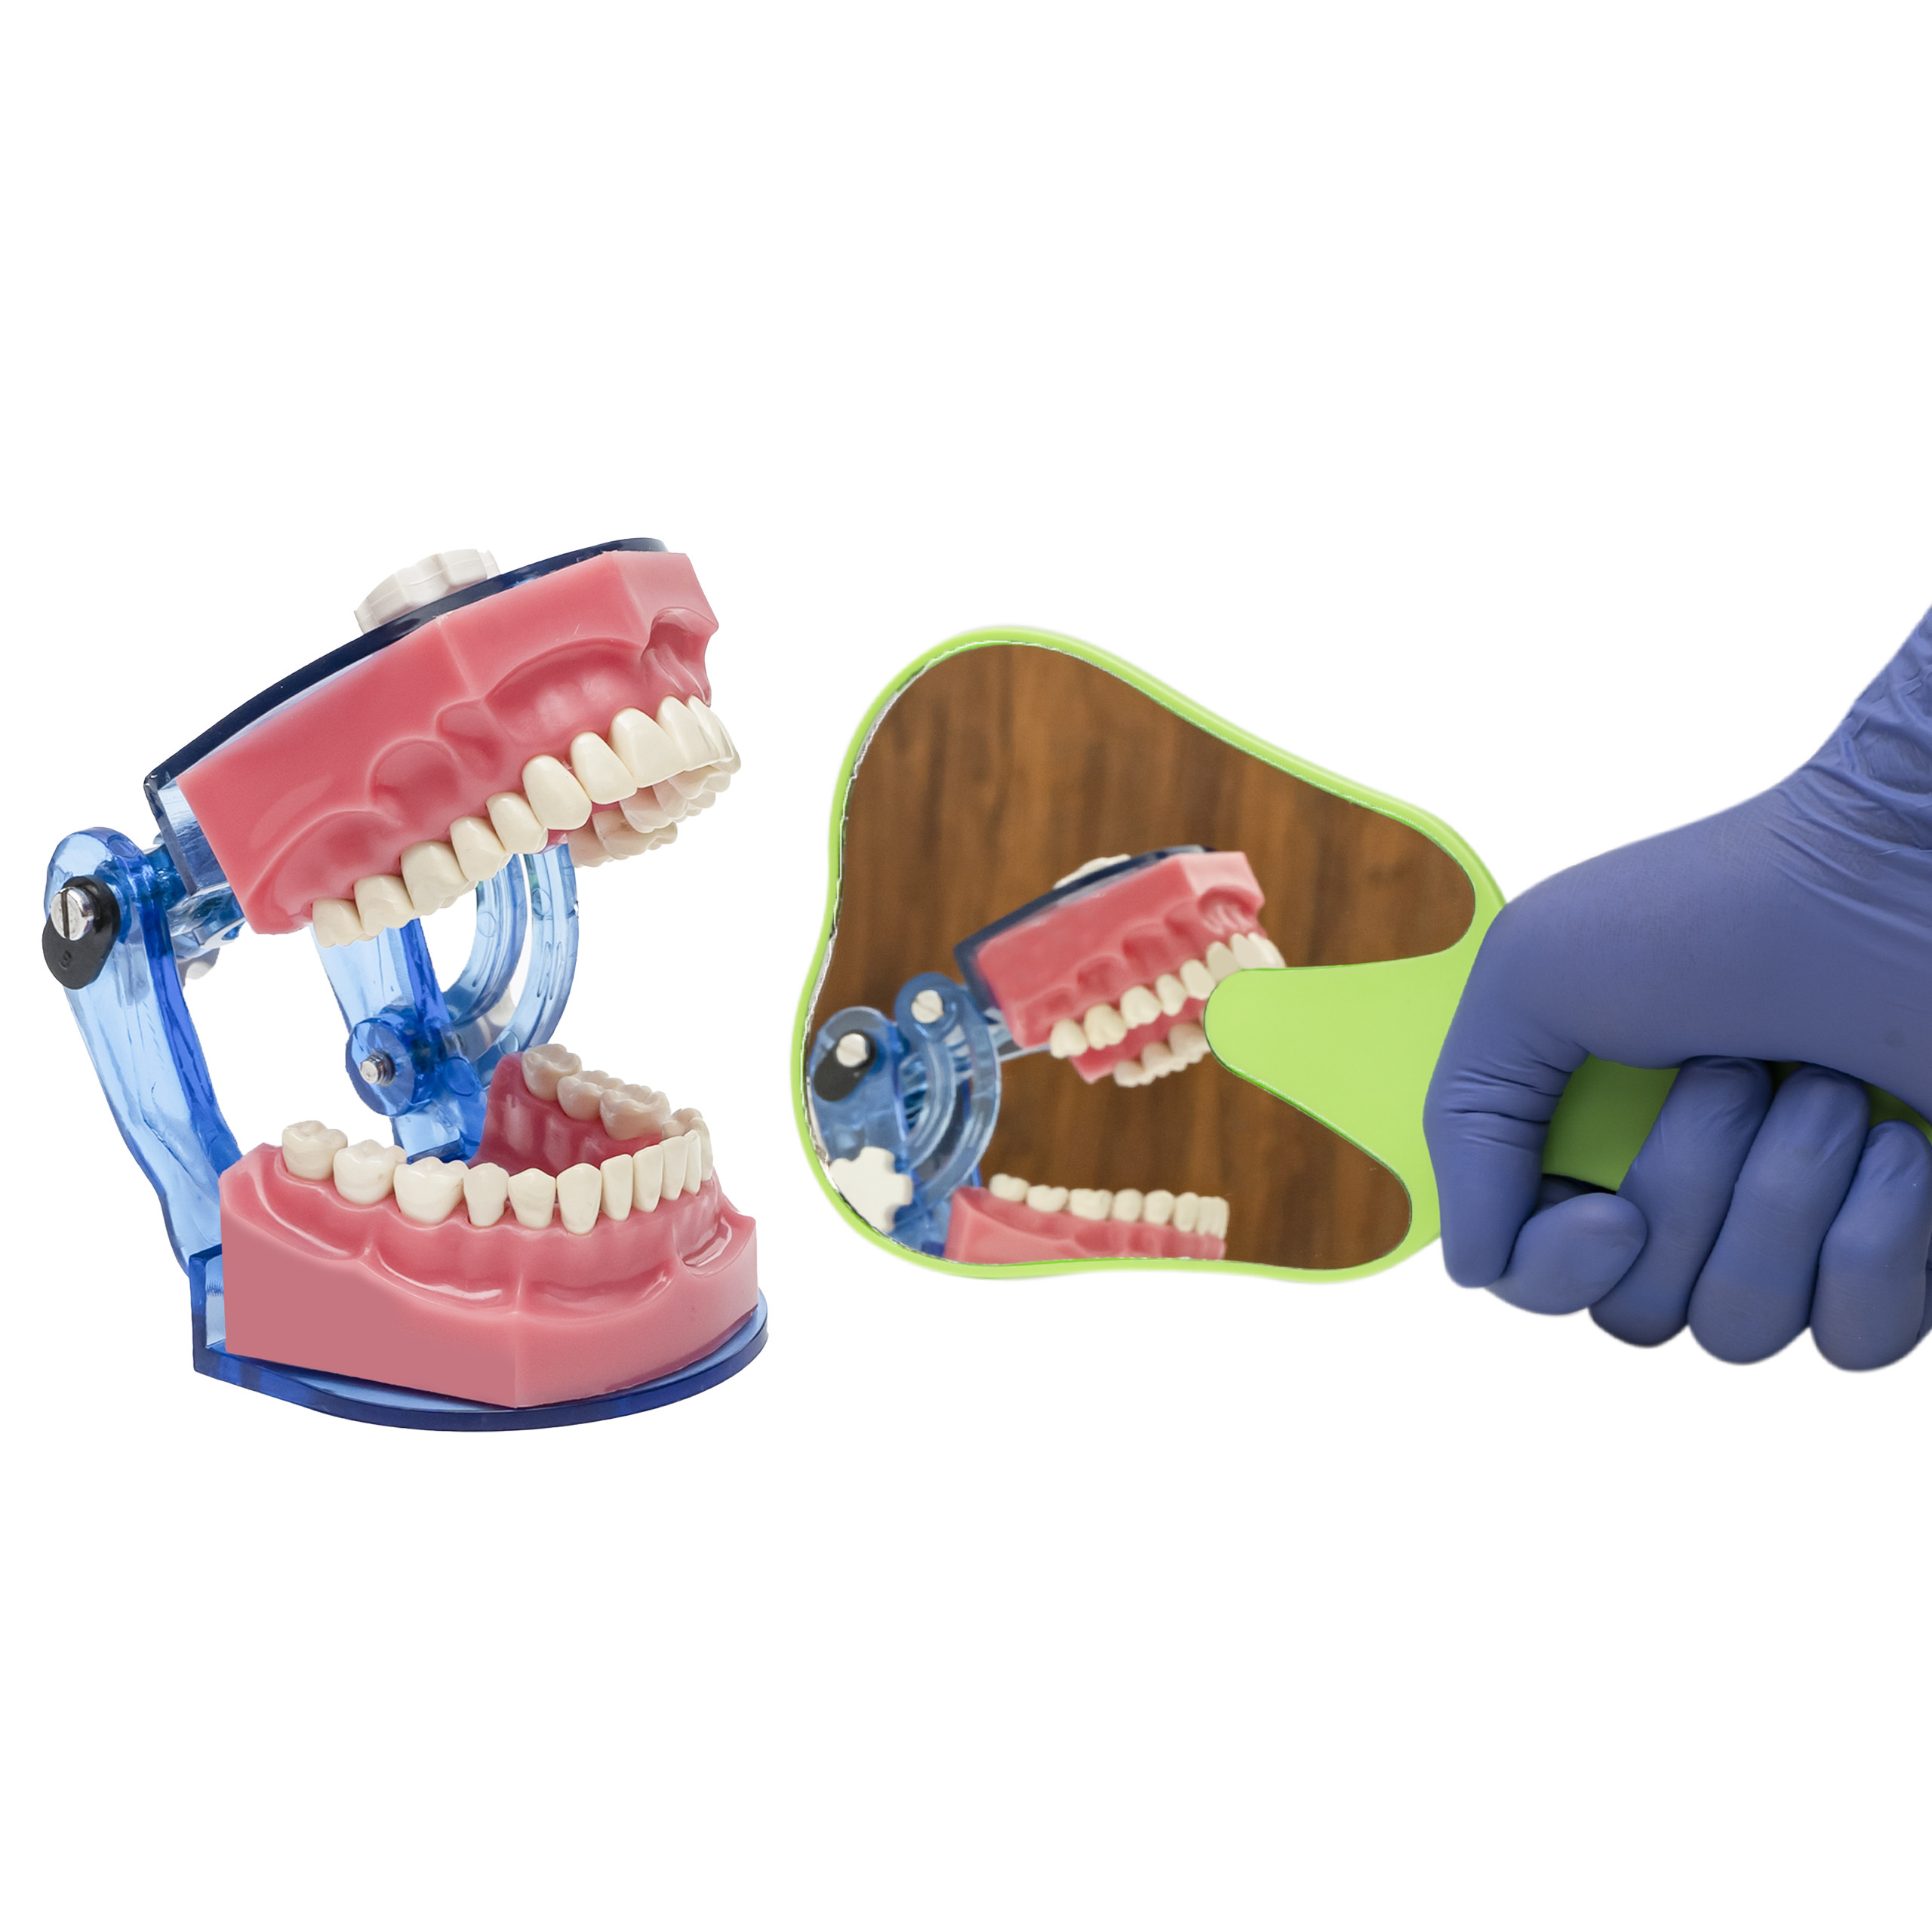 Dental Face Mirror/ Tooth Shaped Hand Mirror